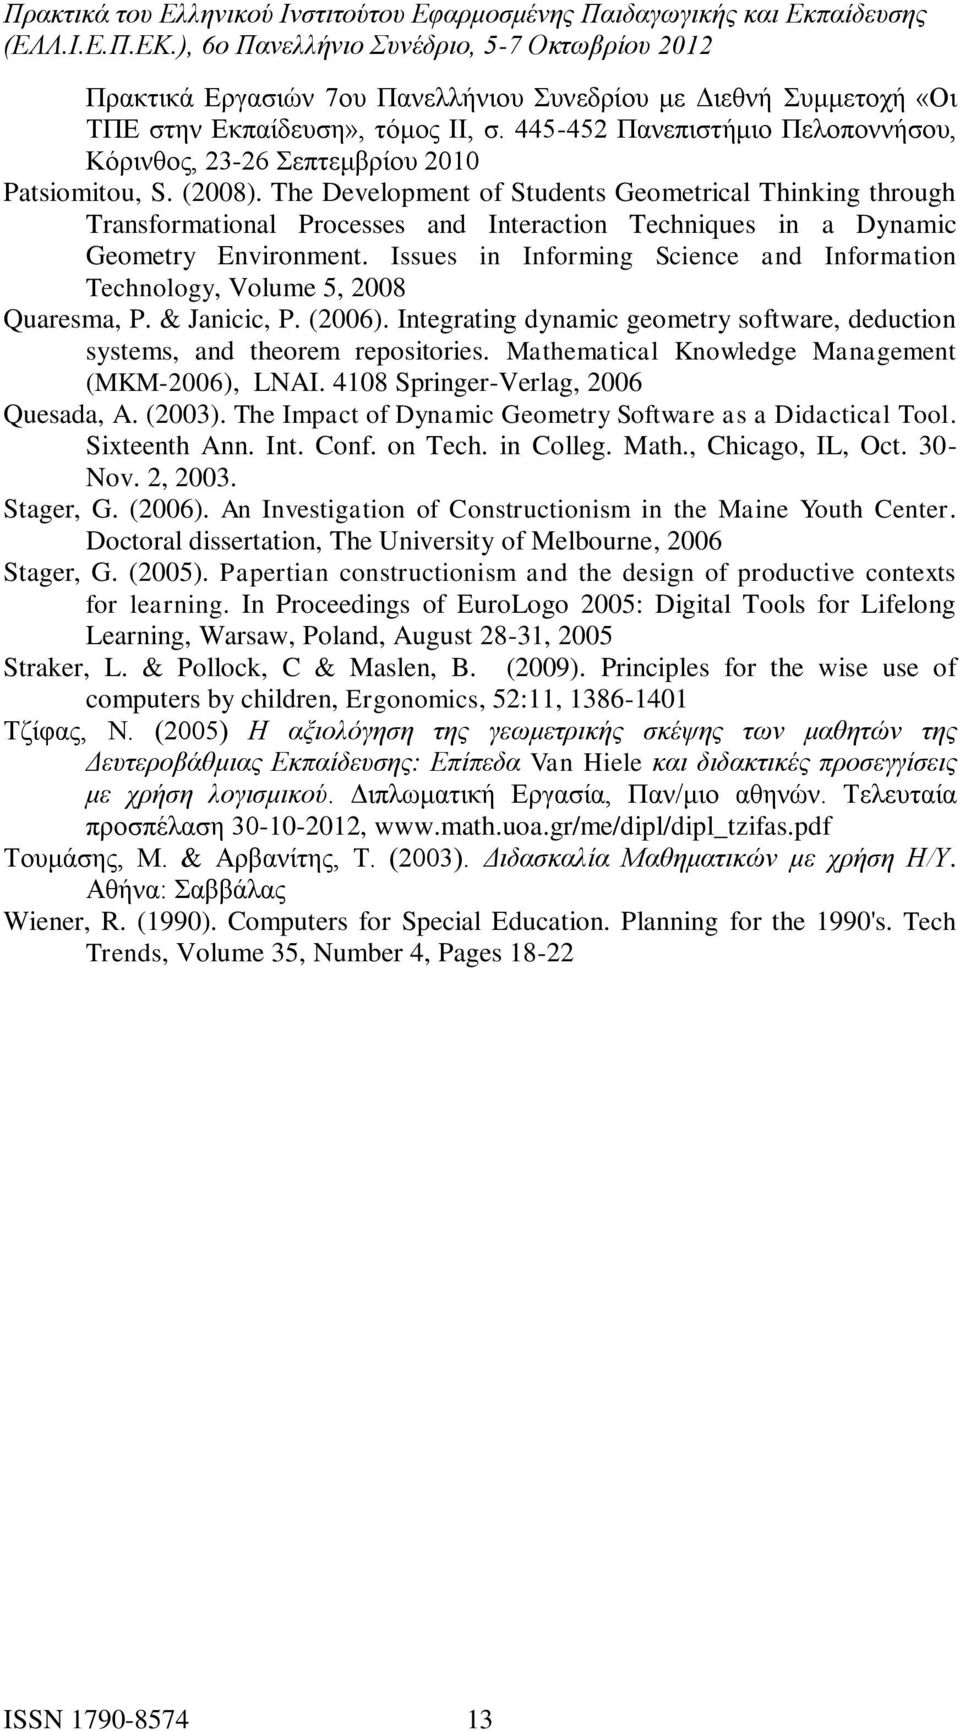 Issues in Informing Science and Information Technology, Volume 5, 2008 Quaresma, P. & Janicic, P. (2006). Integrating dynamic geometry software, deduction systems, and theorem repositories.